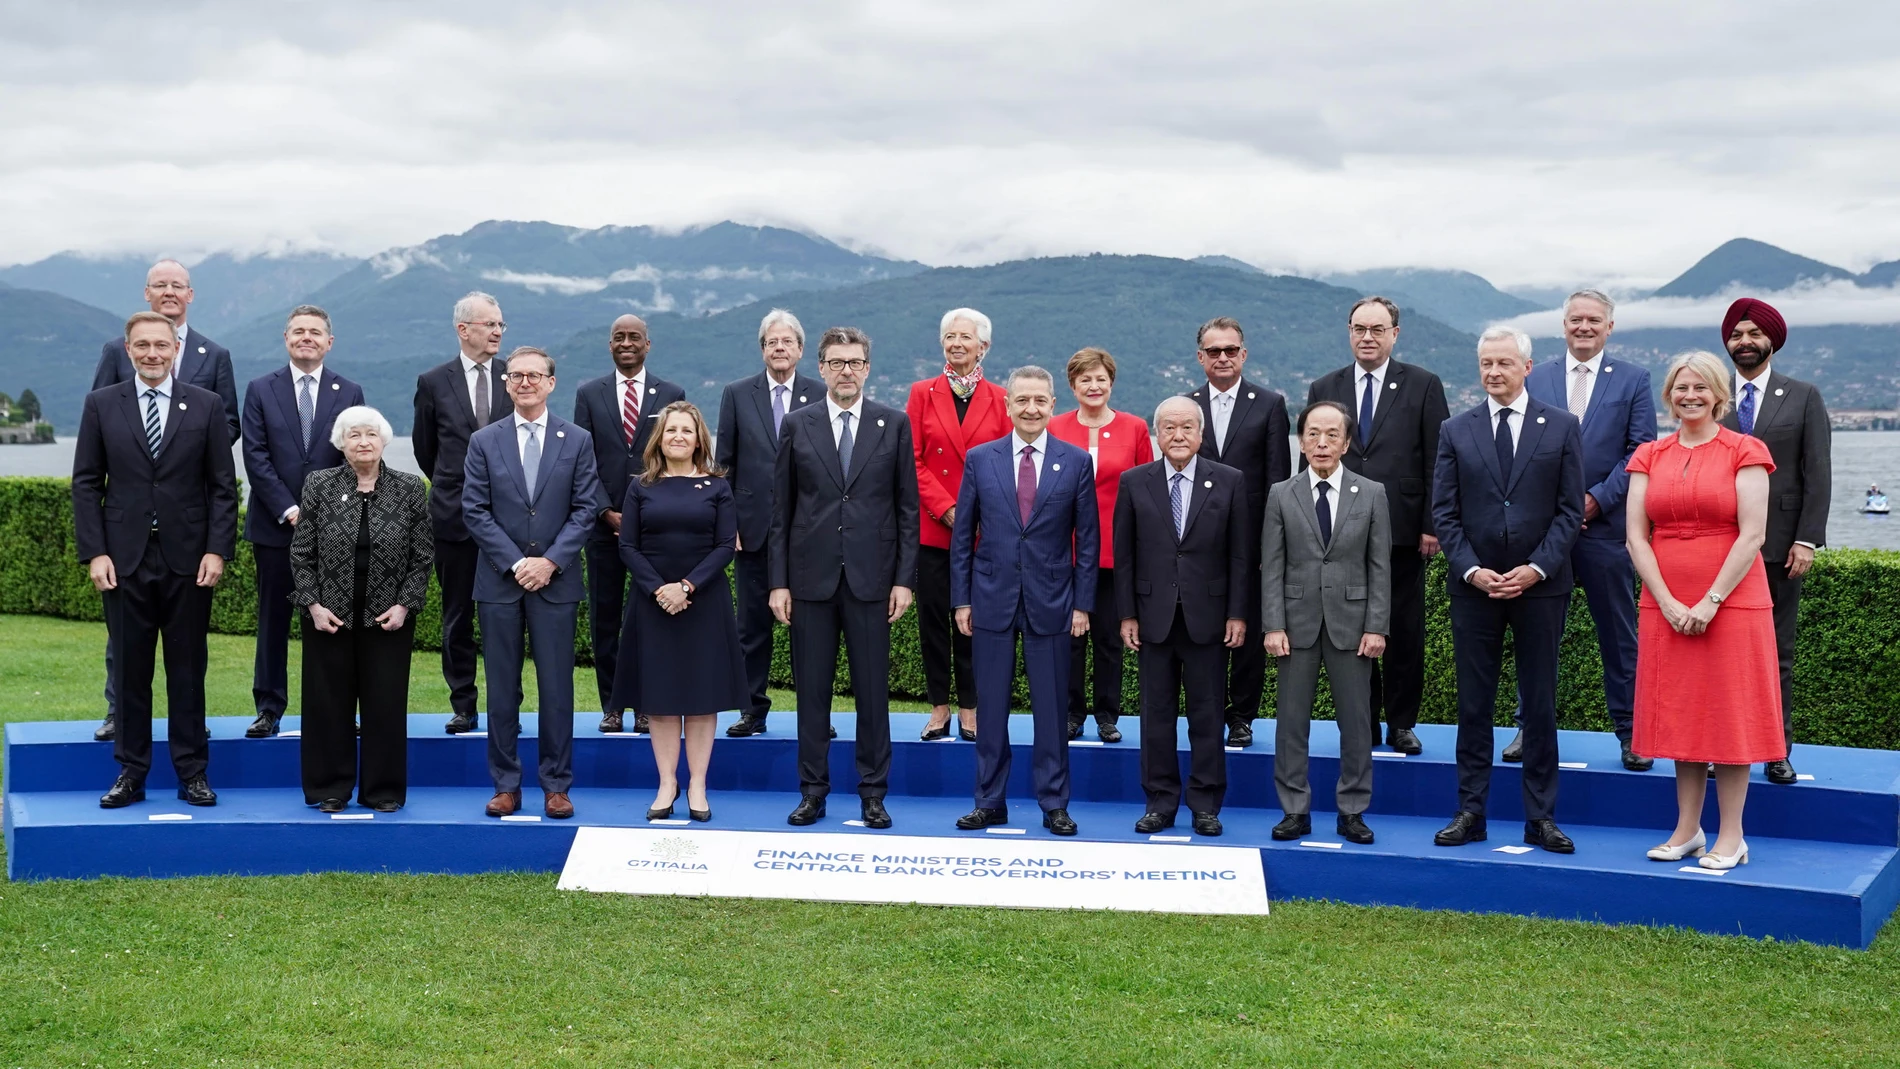 Stresa (Italy), 24/05/2024.- Ministers and Central Bank Governors pose for a family photo during the G7 Finance Ministers and Central Bank Governors Meeting in Stresa, Northern Italy, 24 May 2024. The G7 Finance Ministers' Meeting runs from 23 to 25 May. (Italia) EFE/EPA/JESSICA PASQUALON